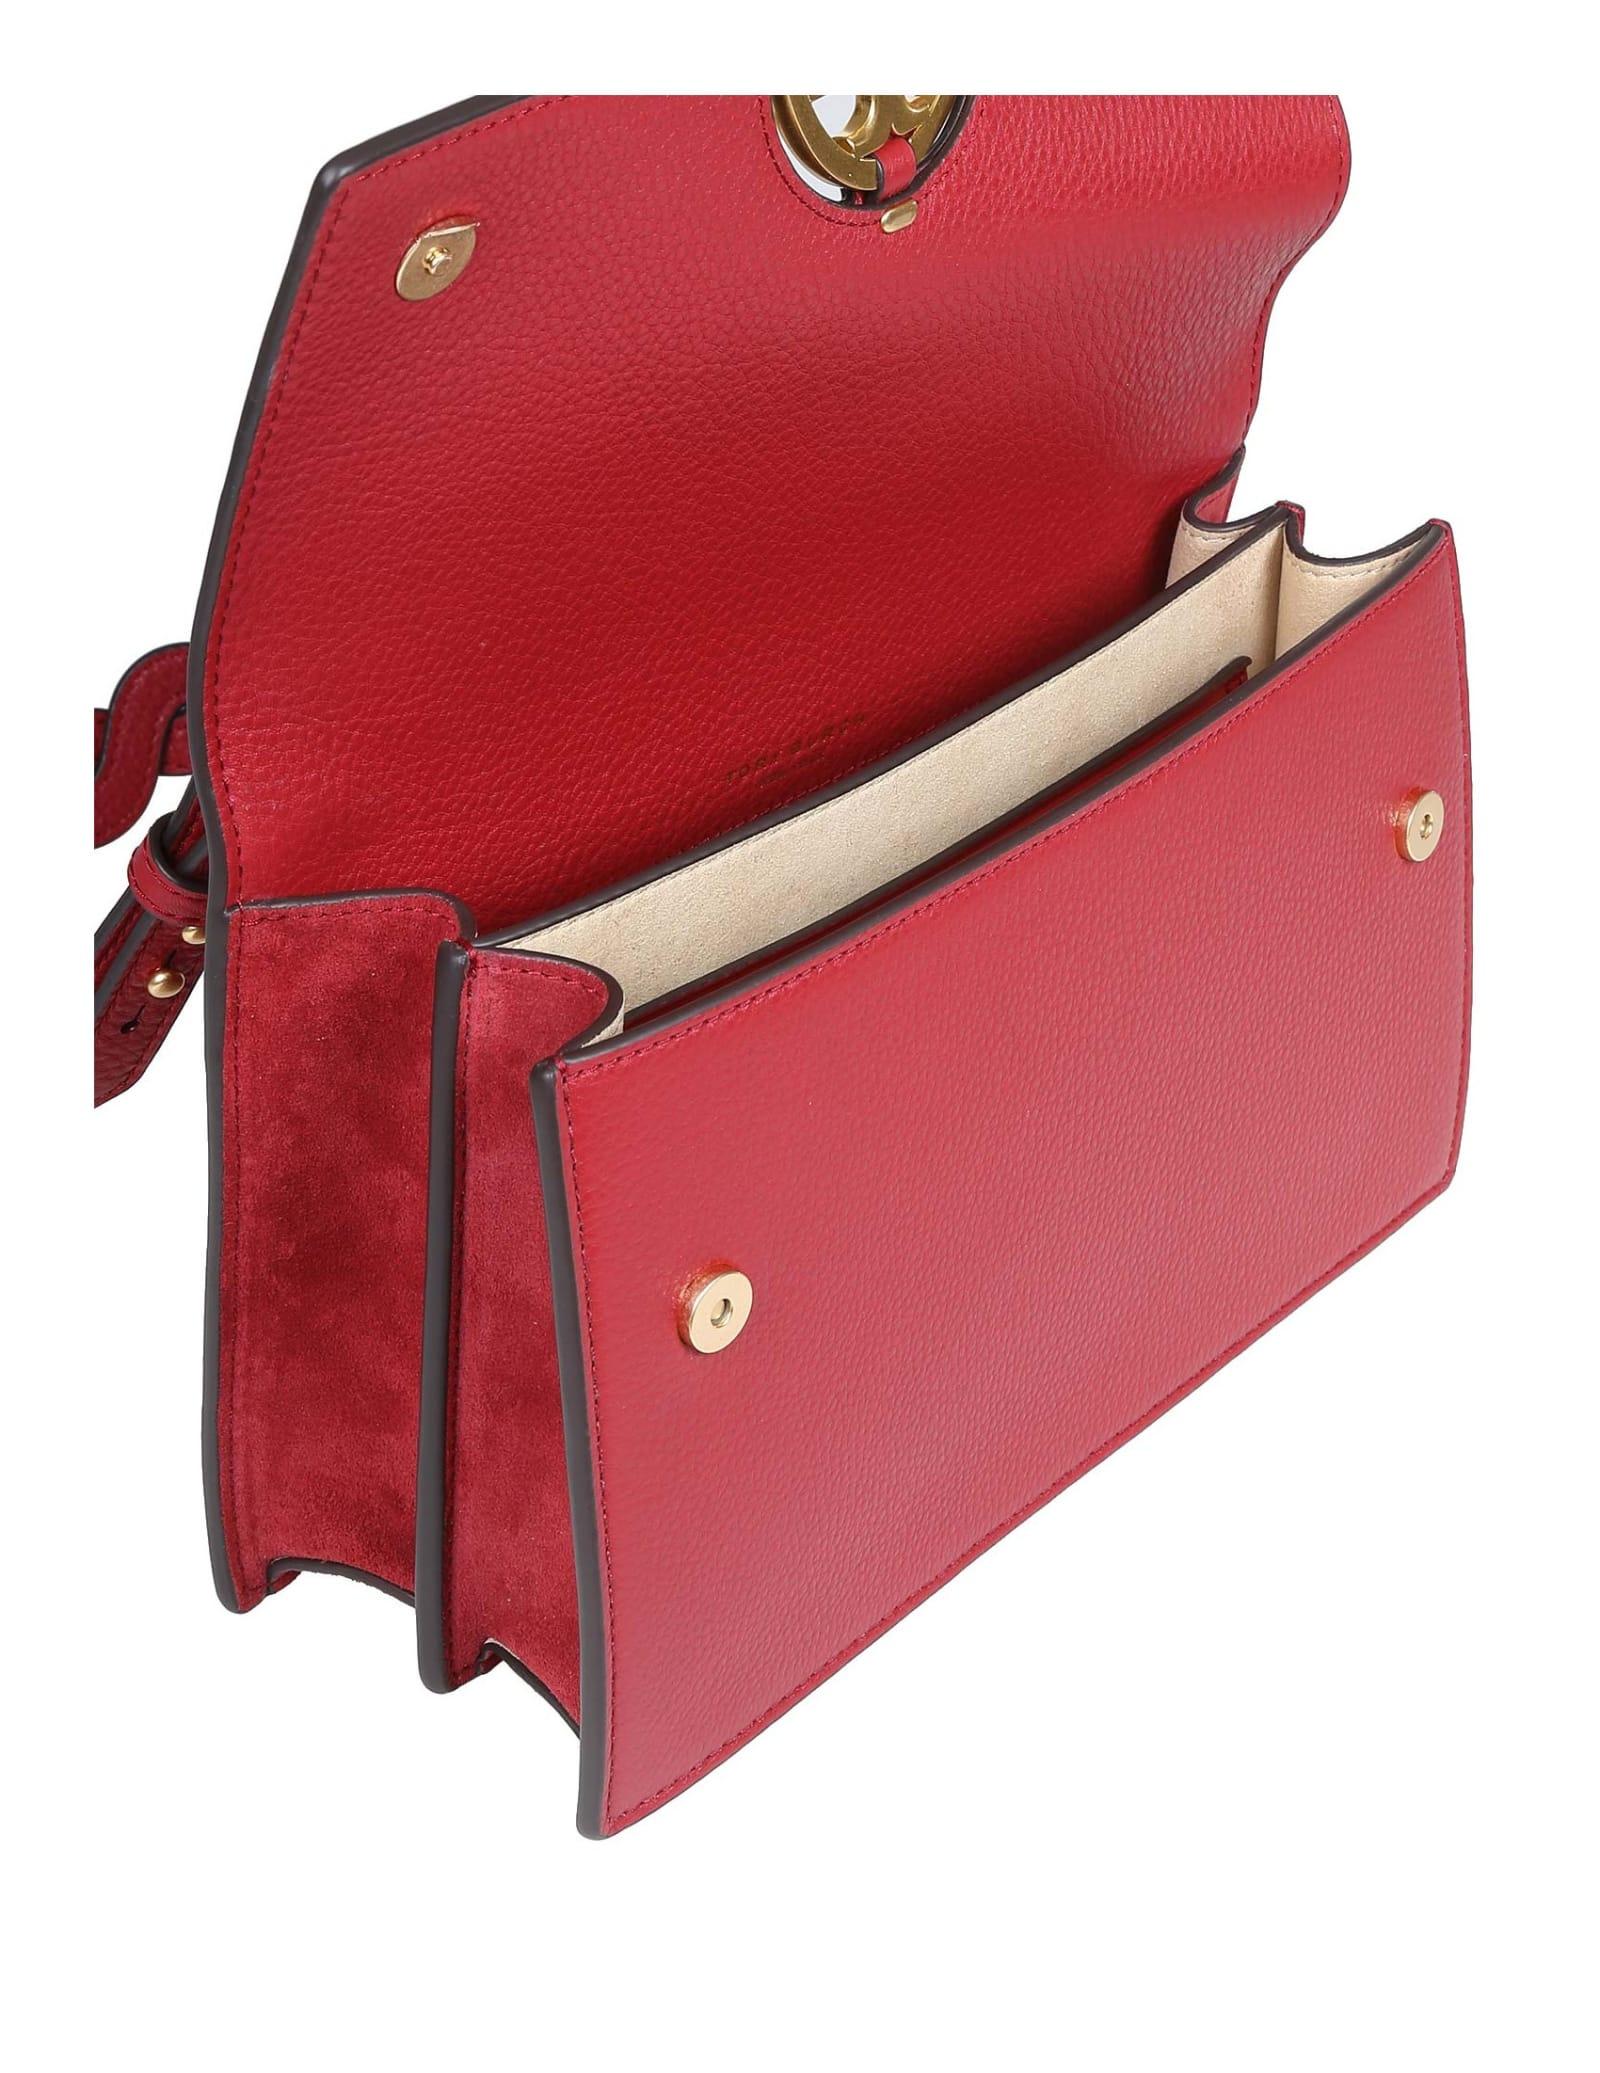 Tory Burch Miller Shoulder Bag In Leather in Red